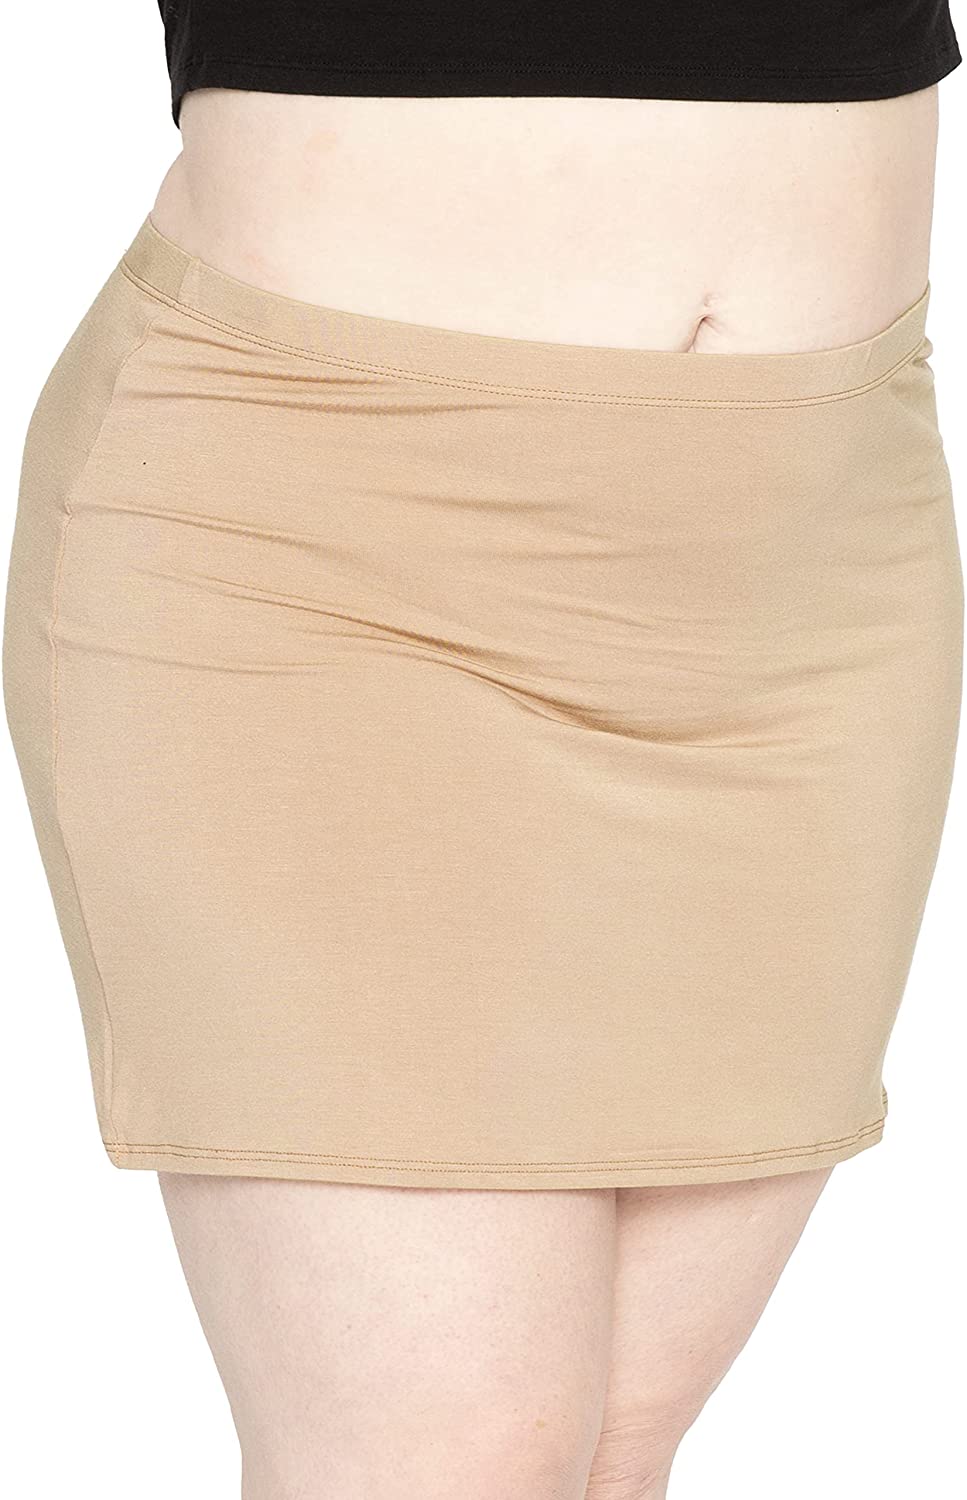 Women's Plus Size Cotton Soft Stretch Fabric Basic Mini Skirt Made in The USA 